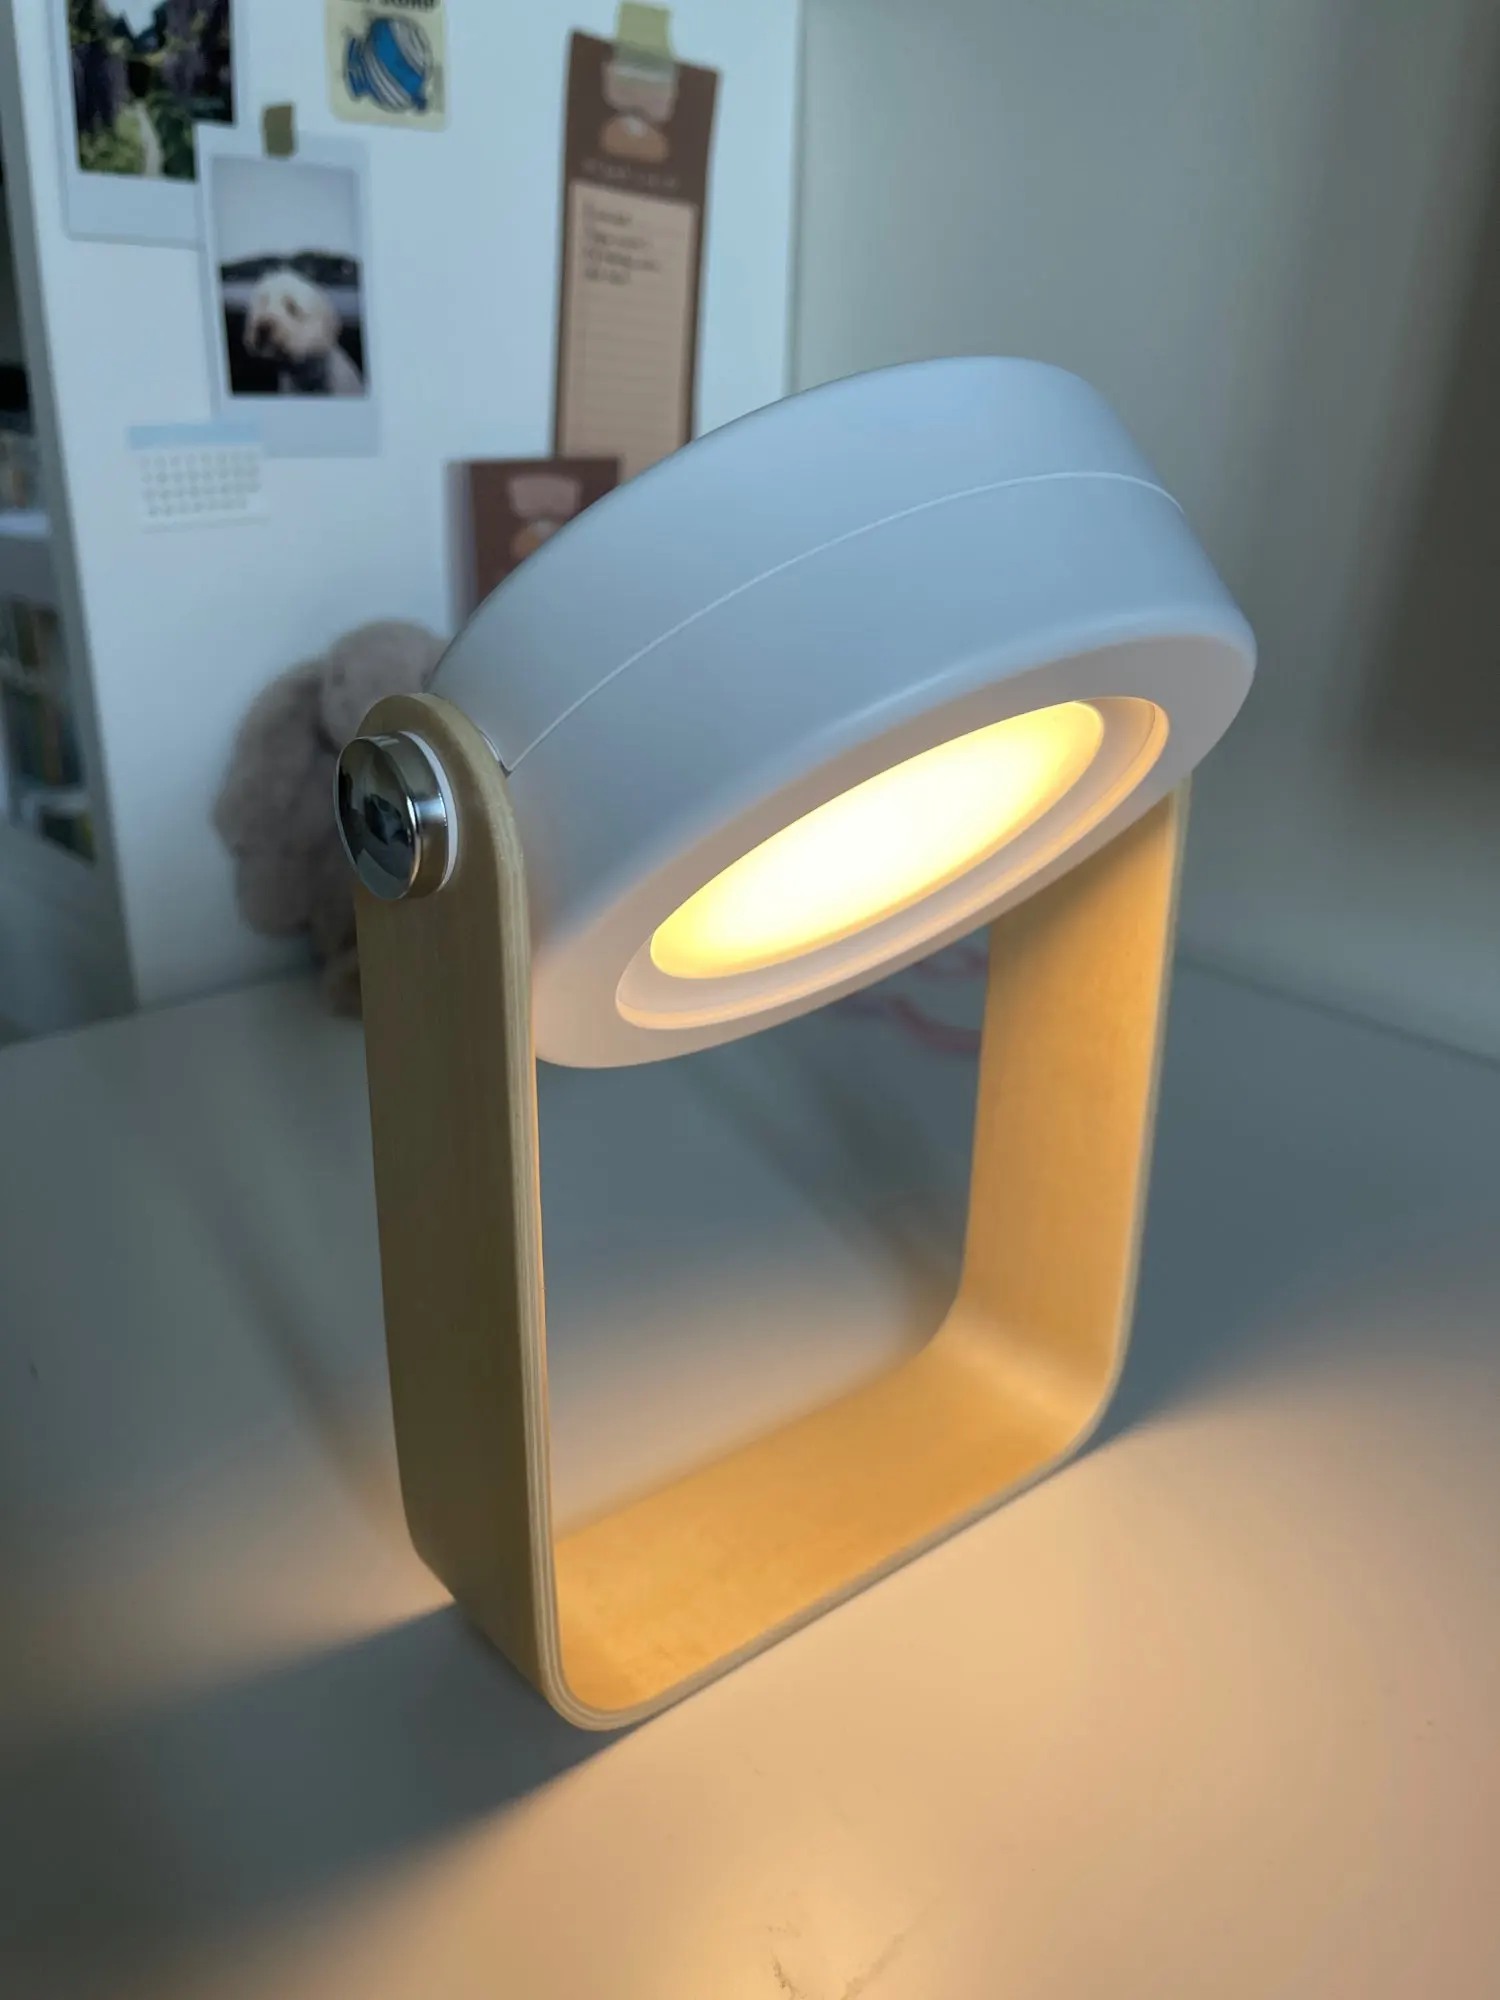 Lampe Veilleuse Adulte photo review